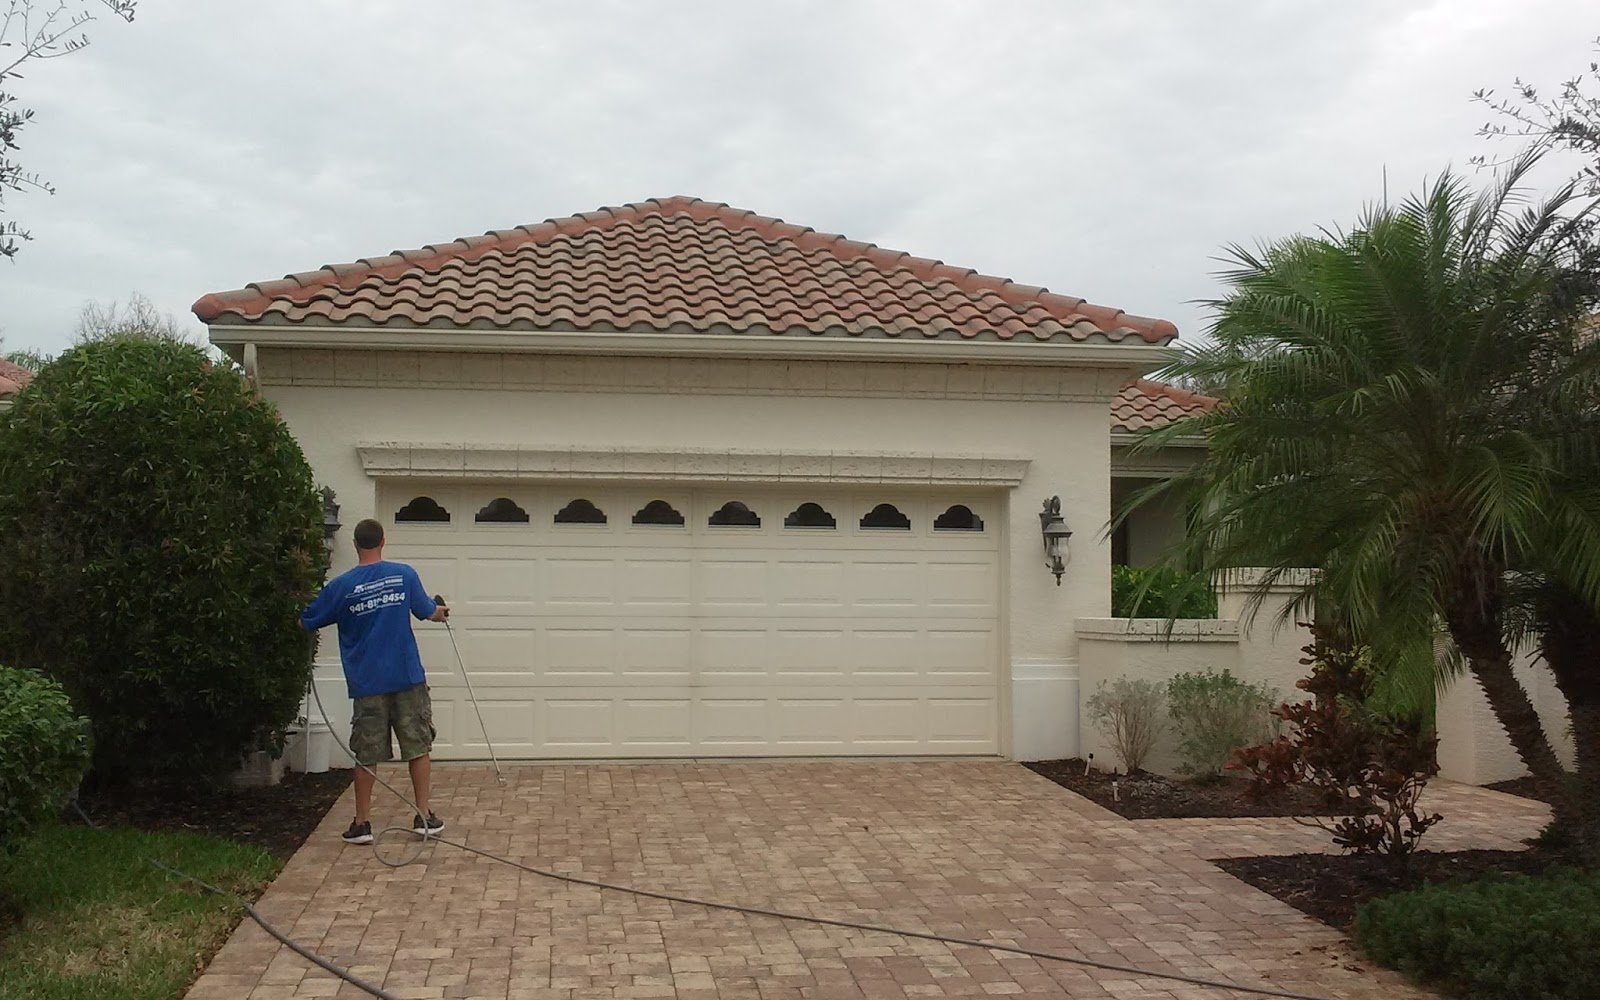 Sarasota Roof Cleaning Using Safe No Pressure Roof Cleaning System  room decoration idea, room decoration pictures, room decorations, room decoration cheap, and room decoration color No Pressure Roof Cleaning 1000 x 1600